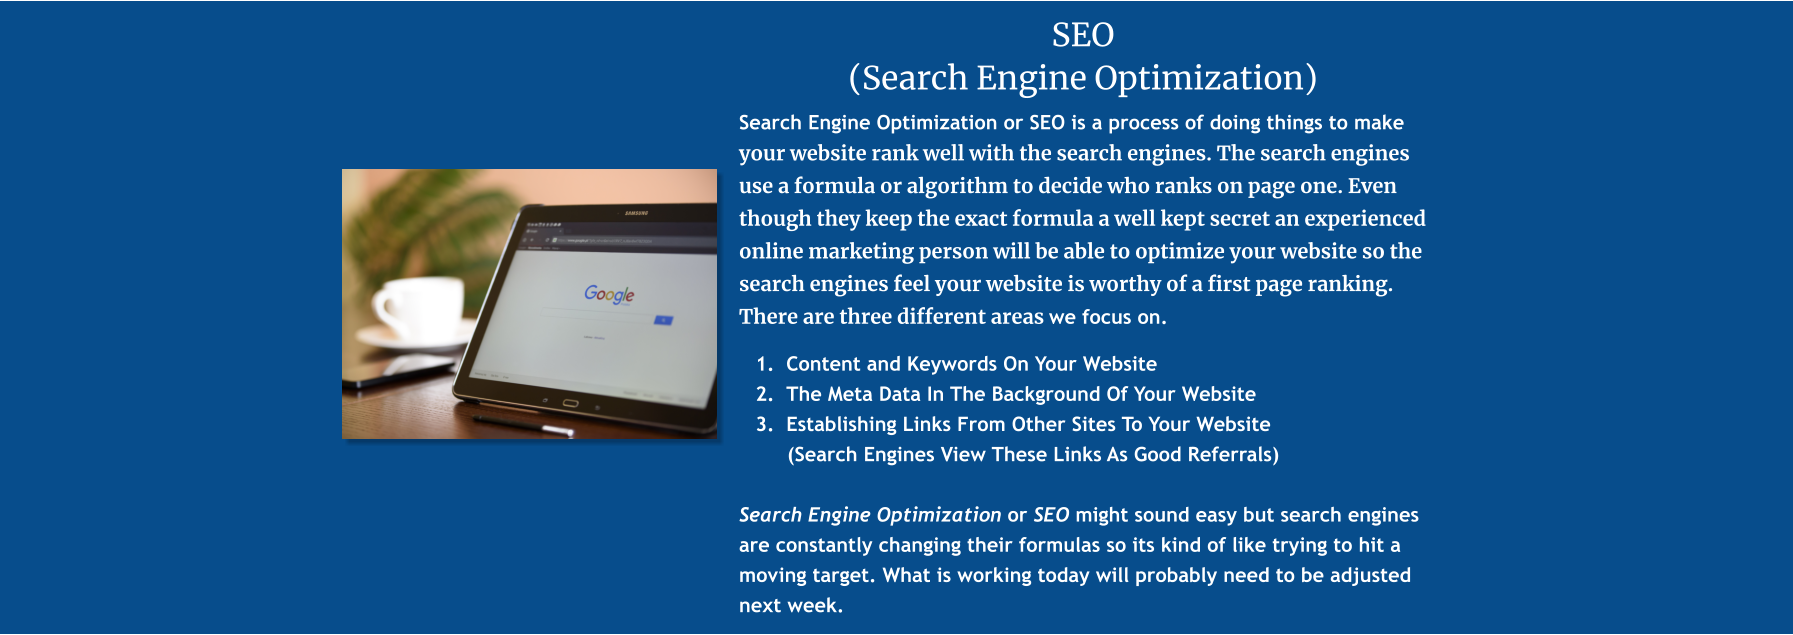 SEO  (Search Engine Optimization) Search Engine Optimization or SEO is a process of doing things to make your website rank well with the search engines. The search engines use a formula or algorithm to decide who ranks on page one. Even though they keep the exact formula a well kept secret an experienced online marketing person will be able to optimize your website so the search engines feel your website is worthy of a first page ranking. There are three different areas we focus on.   	1.	Content and Keywords On Your Website 	2.	The Meta Data In The Background Of Your Website 	3.	Establishing Links From Other Sites To Your Website          (Search Engines View These Links As Good Referrals)  Search Engine Optimization or SEO might sound easy but search engines are constantly changing their formulas so its kind of like trying to hit a moving target. What is working today will probably need to be adjusted next week.